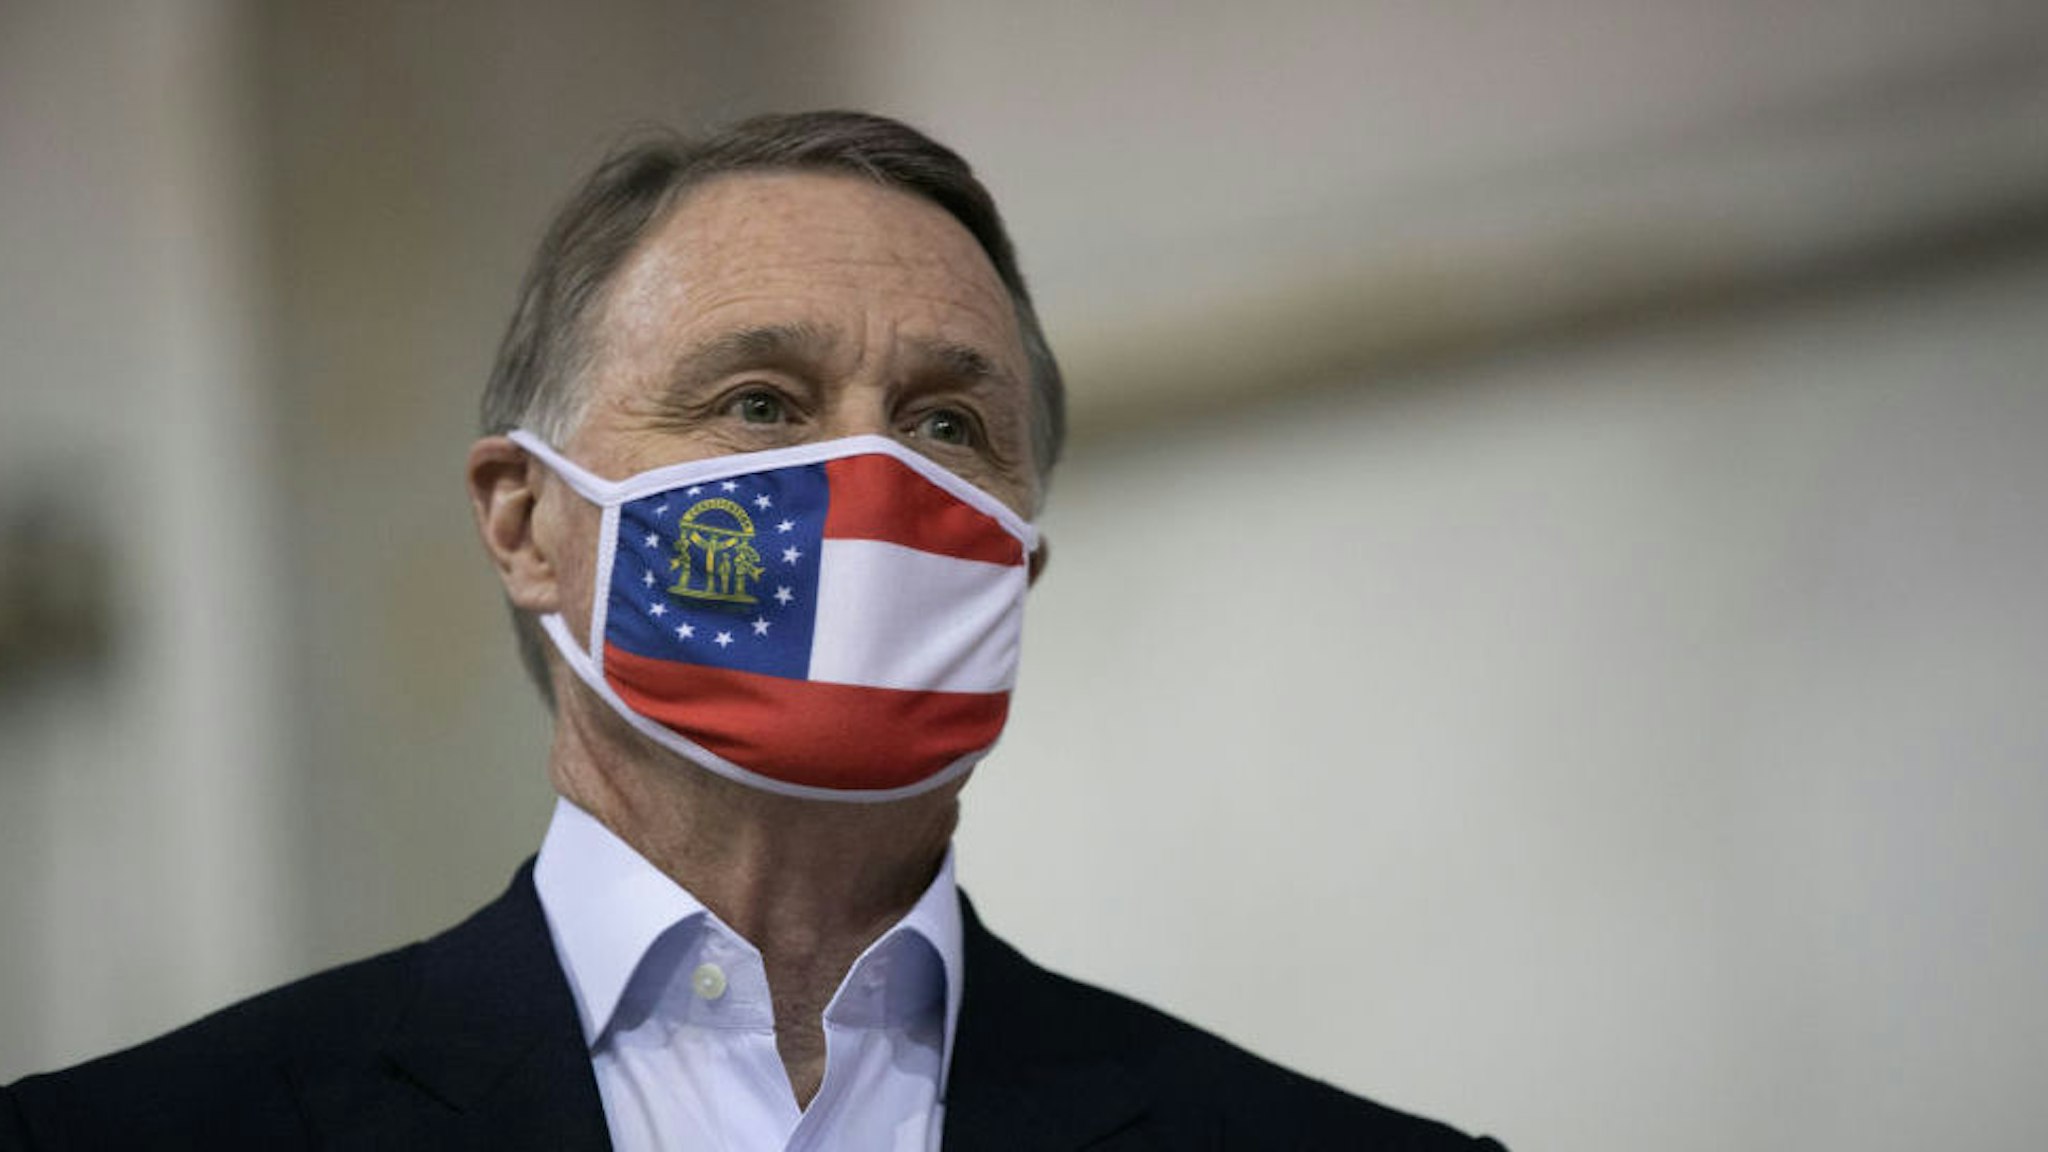 ATLANTA, GA - DECEMBER 14: Sen. David Perdue (R-GA) looks on during a campaign rally at Peachtree Dekalb Airport on December 14, 2020 in Atlanta, Georgia. As early voting begins, Perdue is facing Democratic candidate Jon Ossoff in a runoff election. The results of two Georgia Senate races will determine the party that controls the majority in the U.S. Senate.